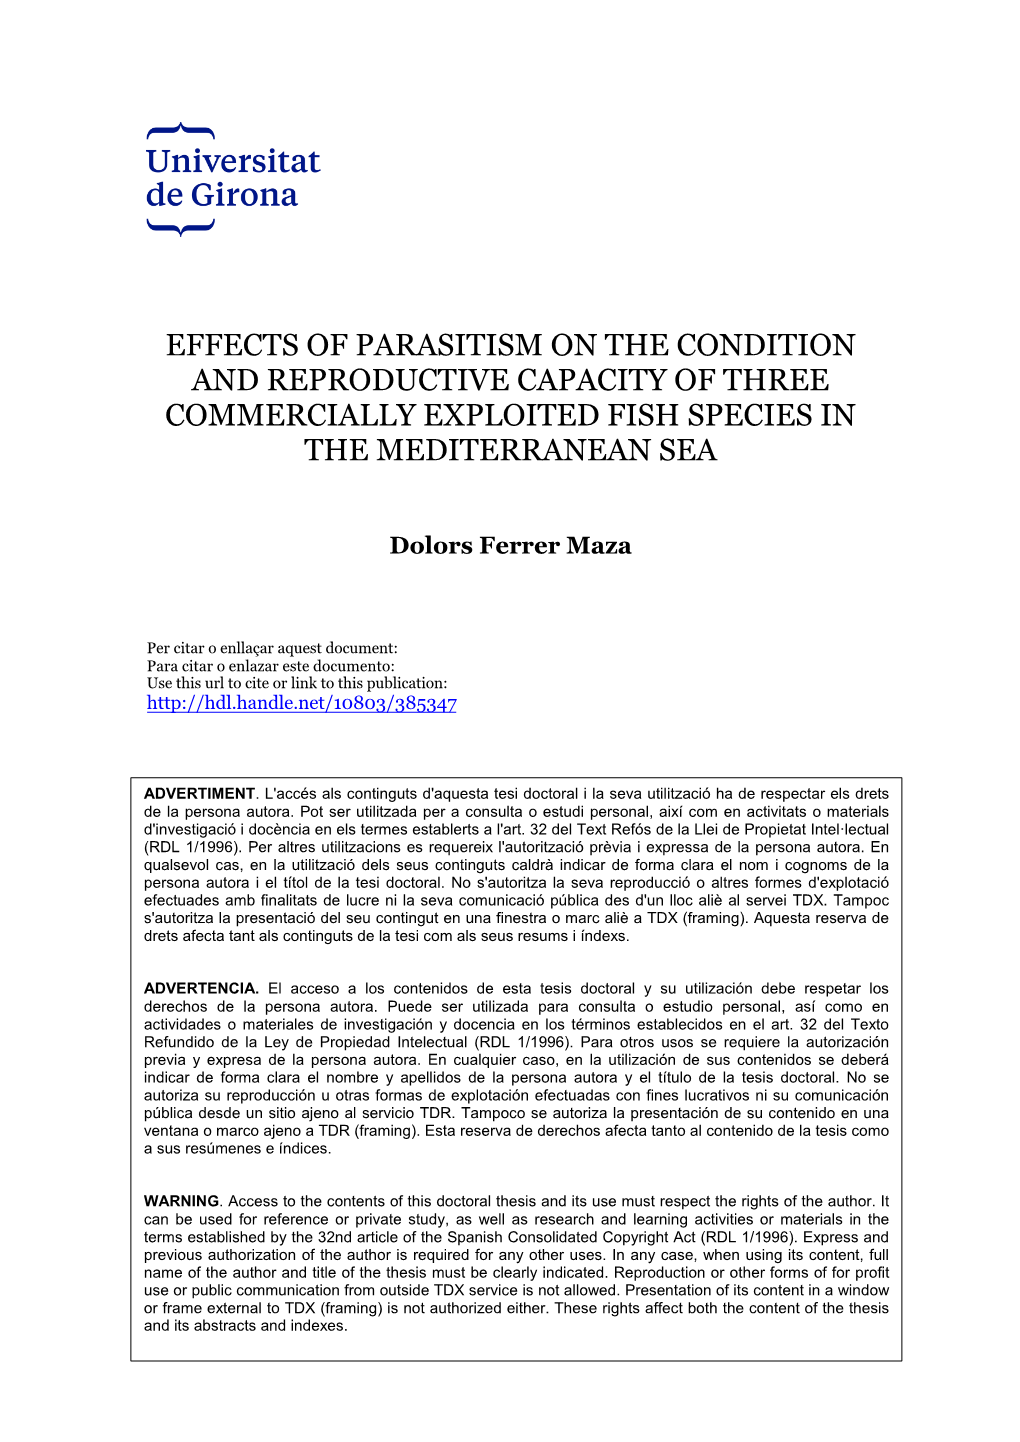 Effects of Parasitism on the Condition and Reproductive Capacity of Three Commercially Exploited Fish Species in the Mediterranean Sea